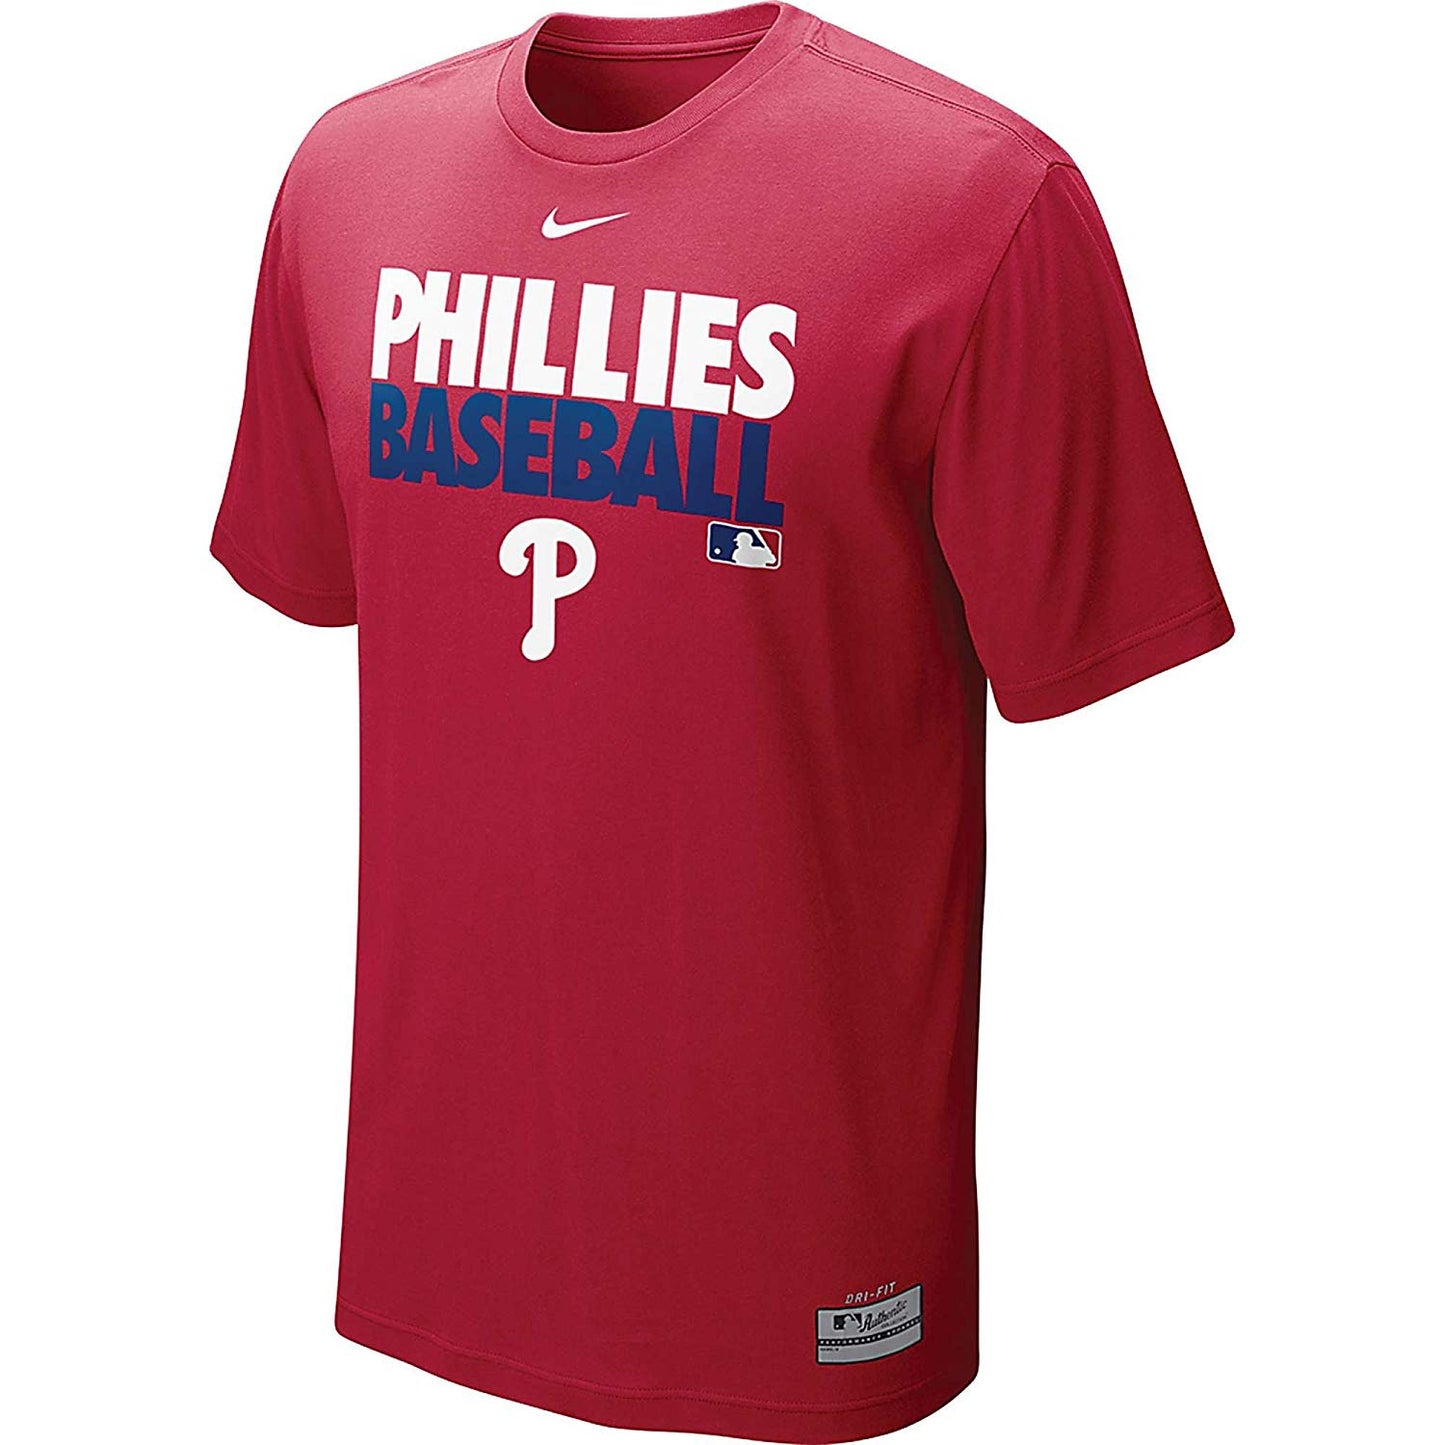 NIKE MLB Philadelphia Phillies MLB Authentic Collection Graphic Performance T-Shirt - Red